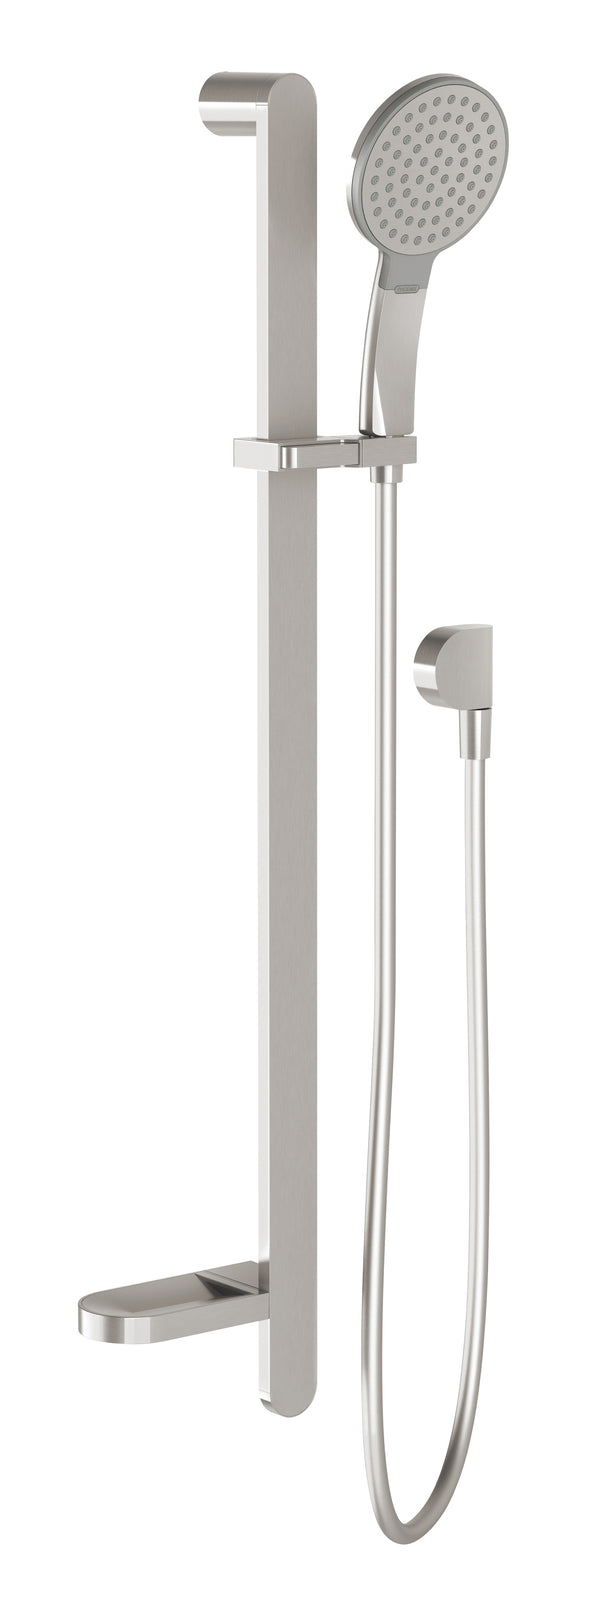 NX QUIL RAIL SHOWER (Brushed Nickel)